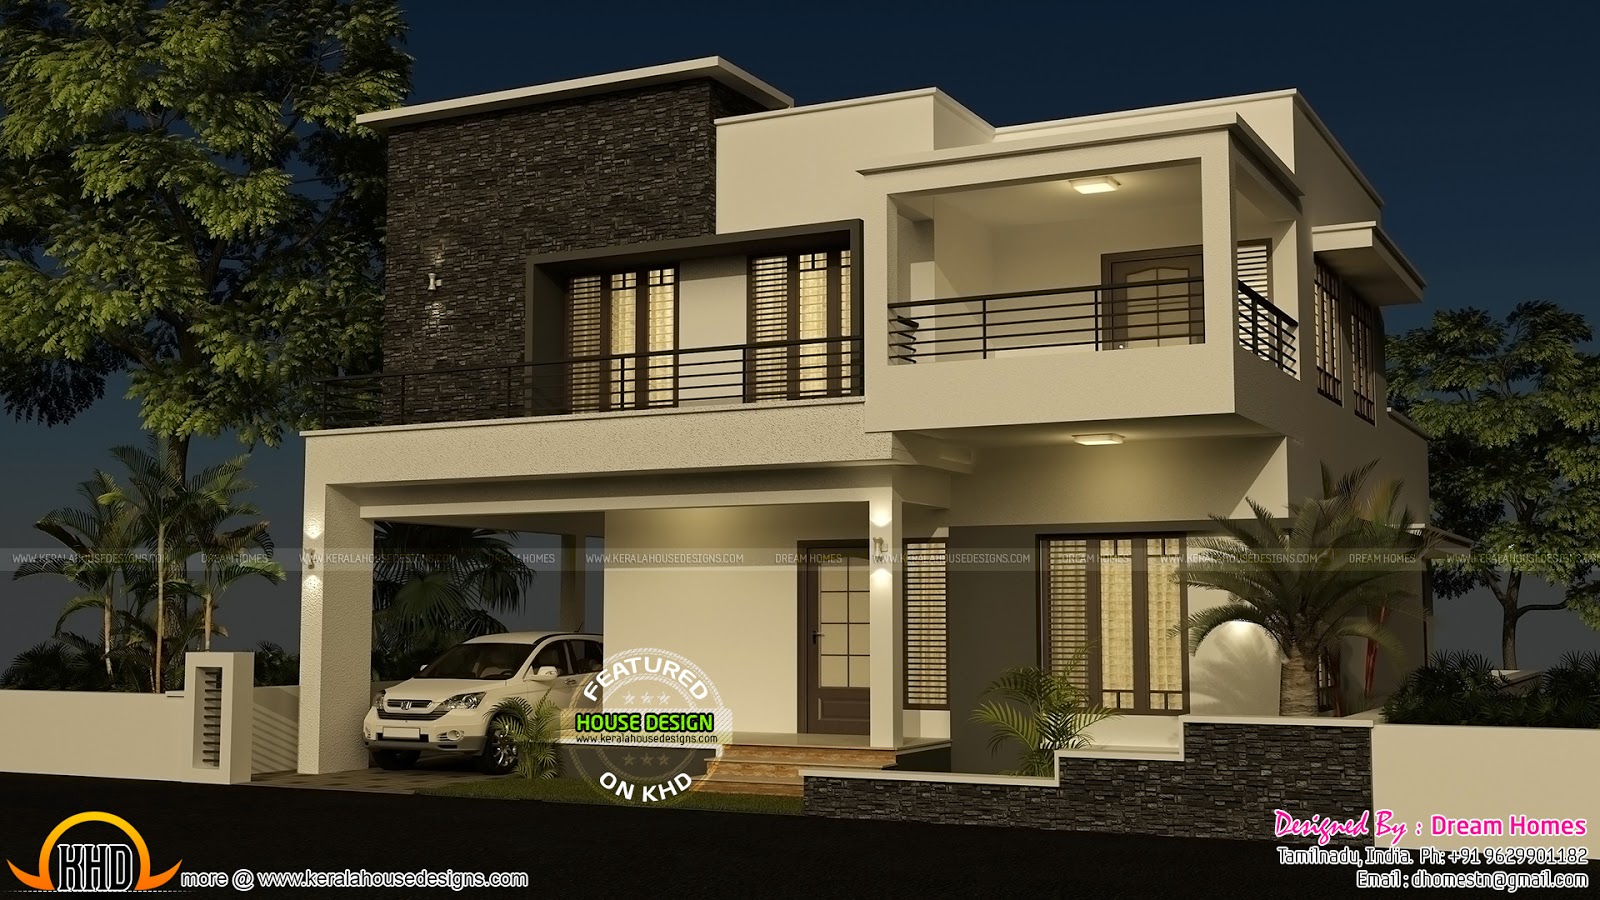 4 bedroom  modern house  with plan  Kerala home  design and 